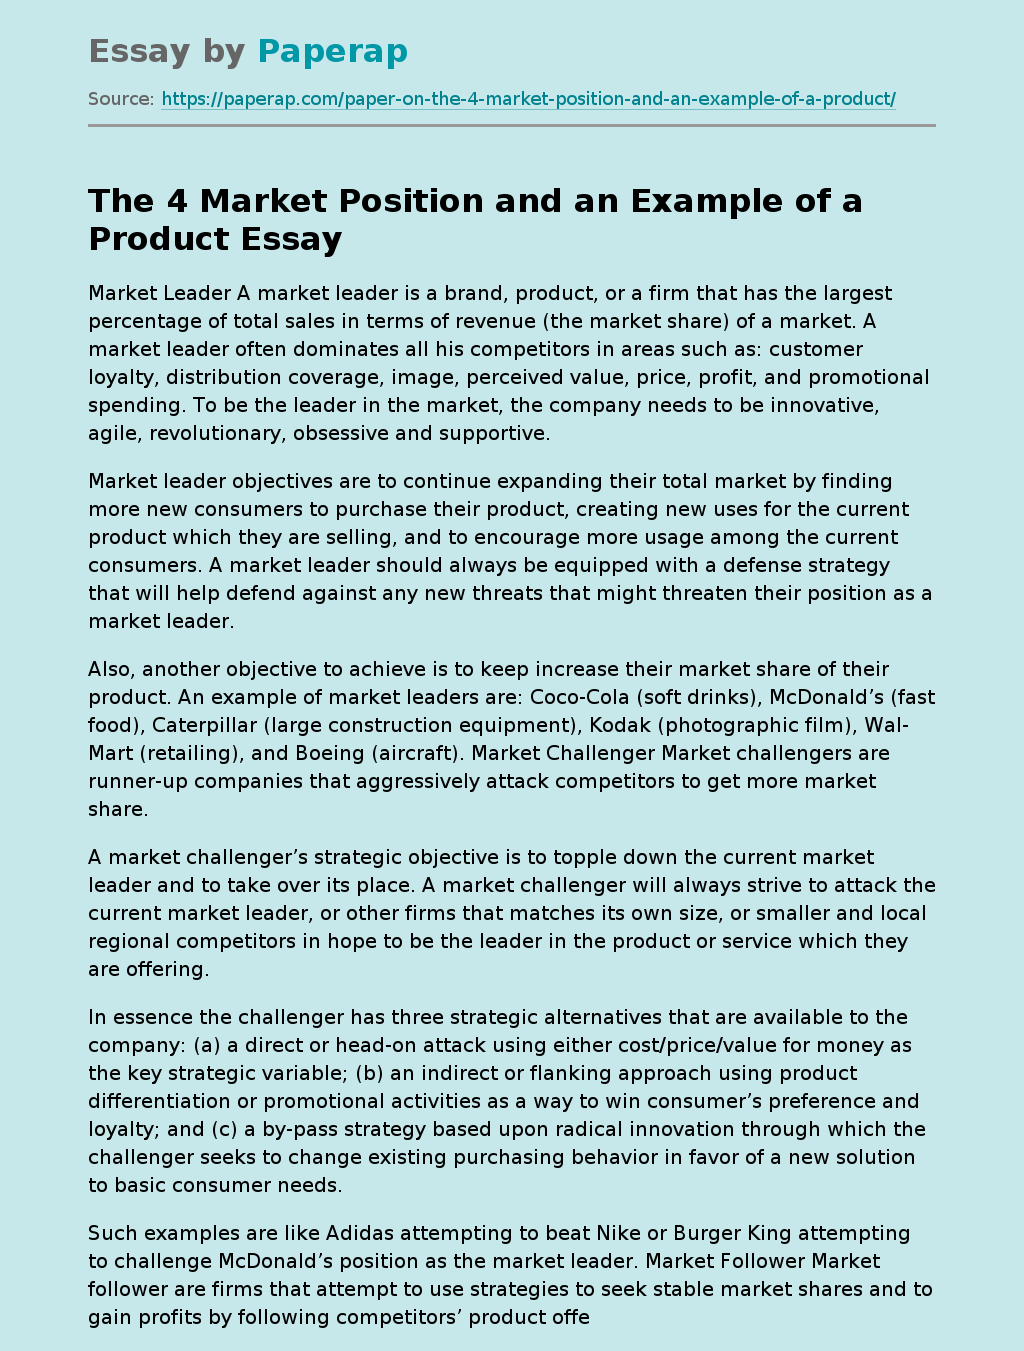 The 4 Market Position and an Example of a Product